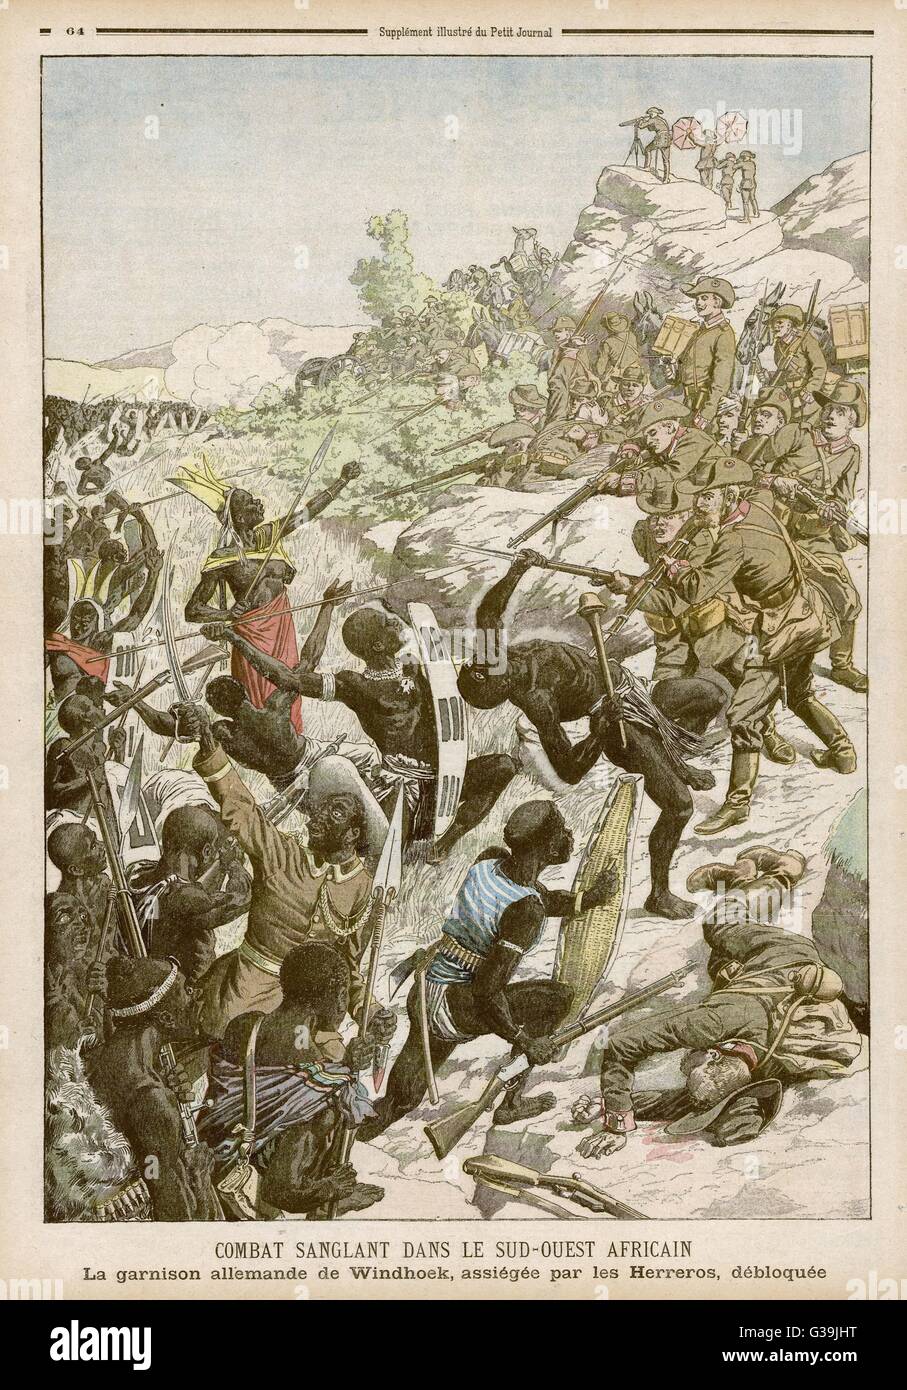 The German garrison at  Windhoek in present-day  Namibia (then German South- West Africa) is attacked by  warriors of the Herrero people       Date: February 1904 Stock Photo